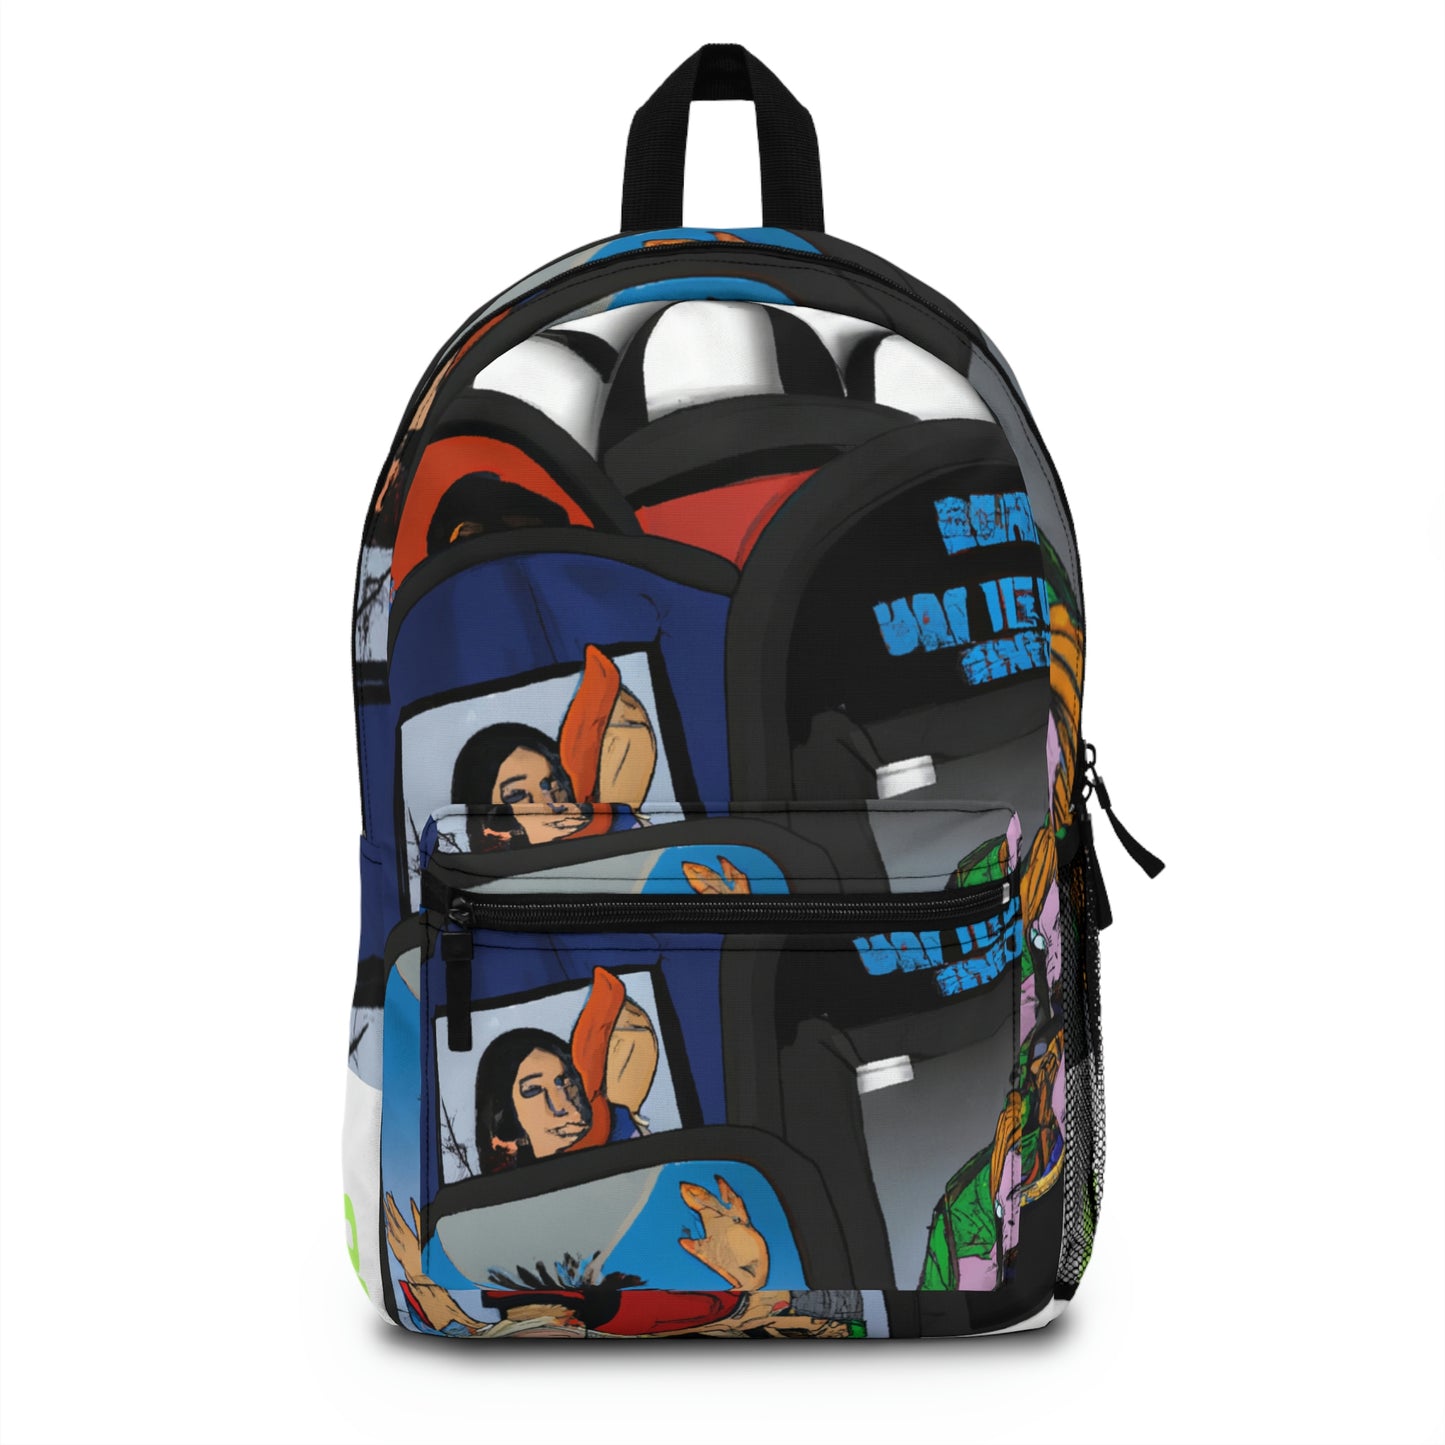 Sapphire Storm - Comic Book Backpack 1 of 1 Collectible